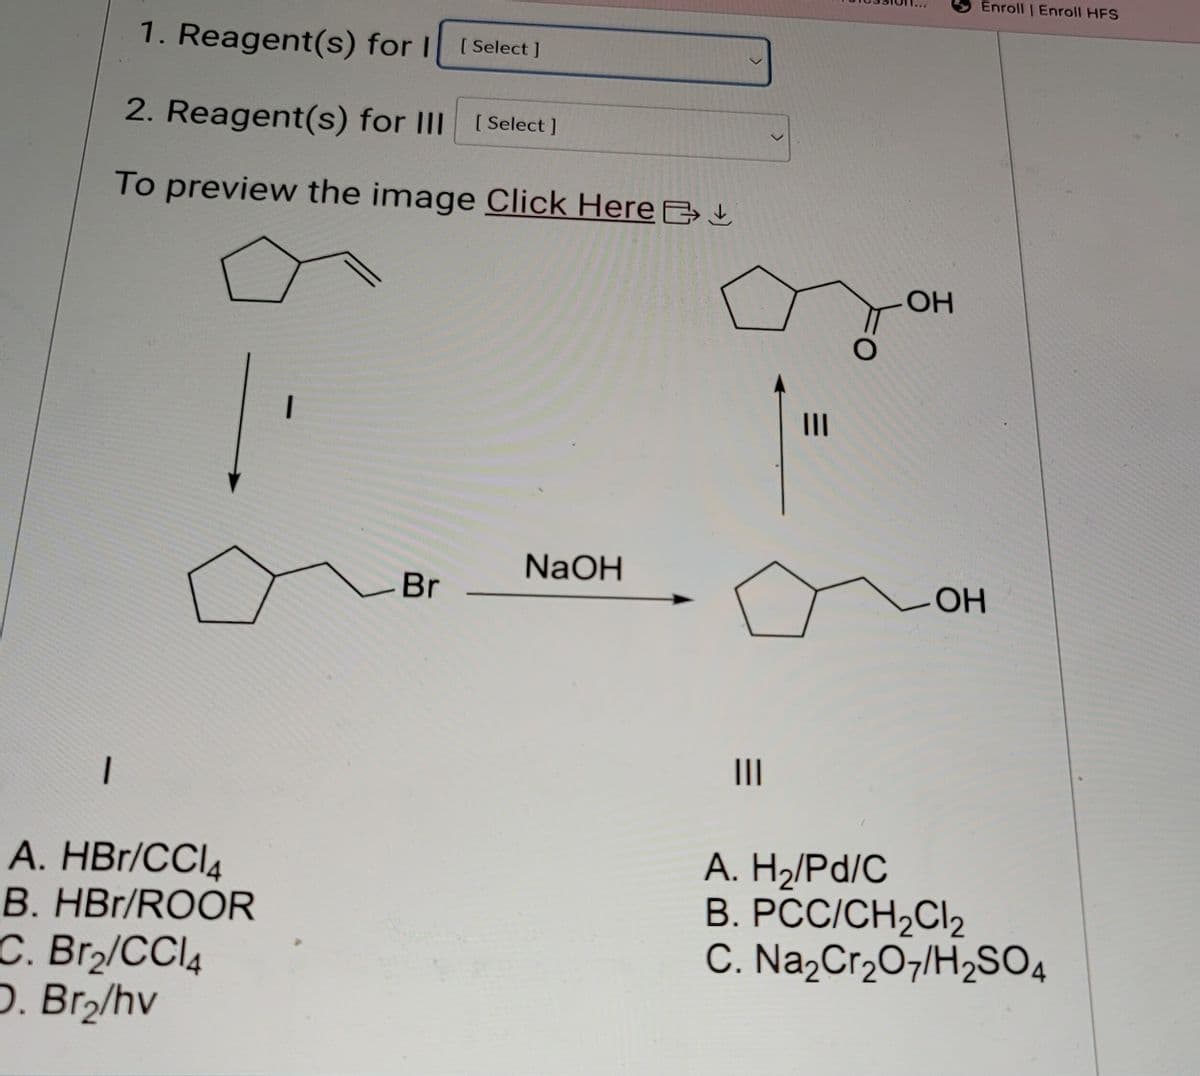 1. Reagent(s) for [Select]
2. Reagent(s) for III [Select]
To preview the image Click Here B
NaOH
Br
>
|||
Enroll | Enroll HFS
OH
OH
I
A. HBr/CCl4
B. HBr/ROOR
C. Br₂/CCl4
D. Br₂/hv
|||
A. H₂/Pd/C
B. PCC/CH2Cl2
C. Na2Cr2O7/H2SO4